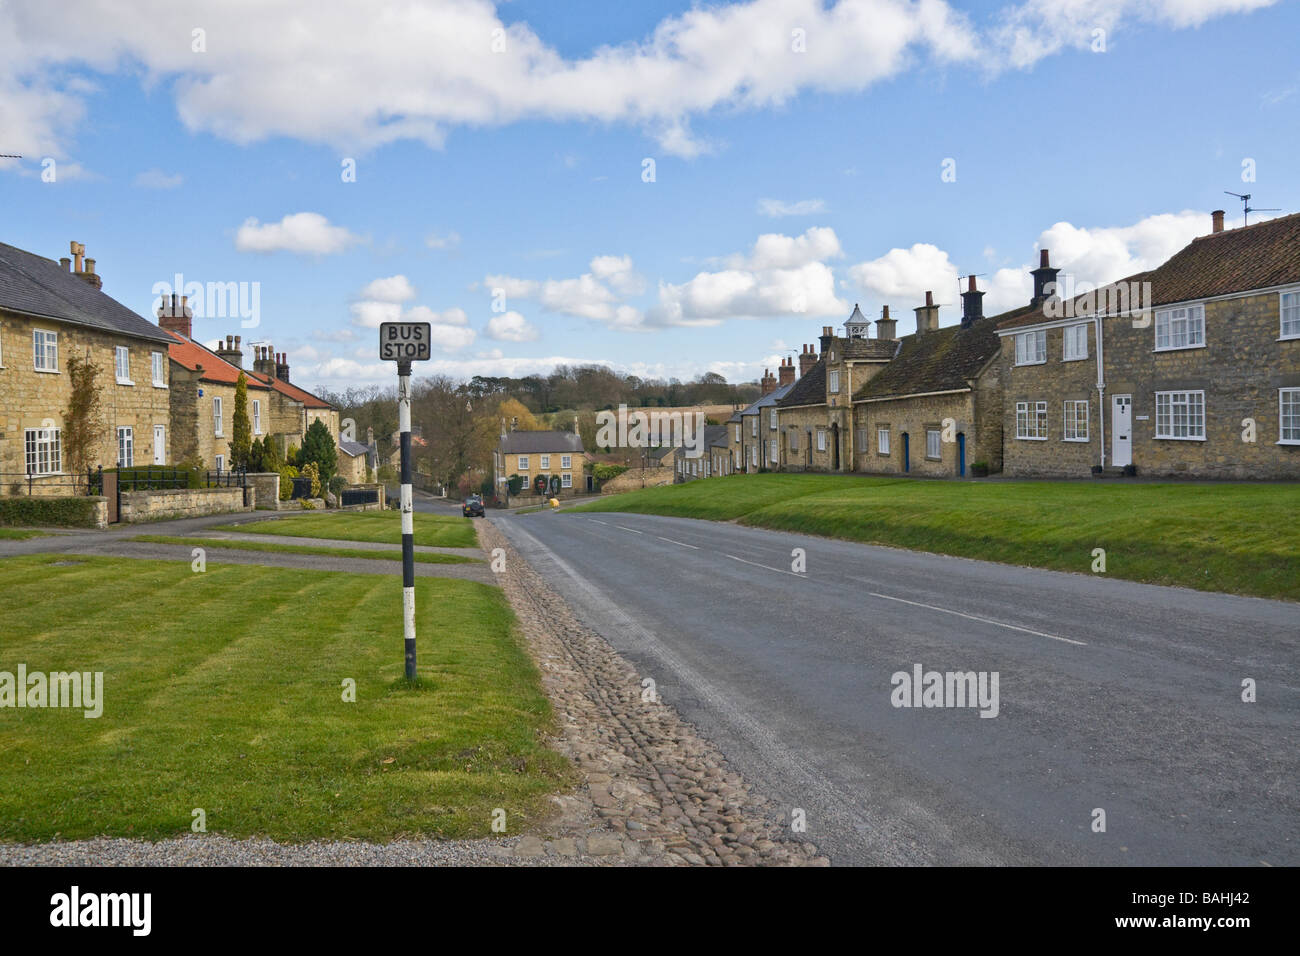 Village green and bus stop at Coxwold, North Yorkshire, UK Stock Photo